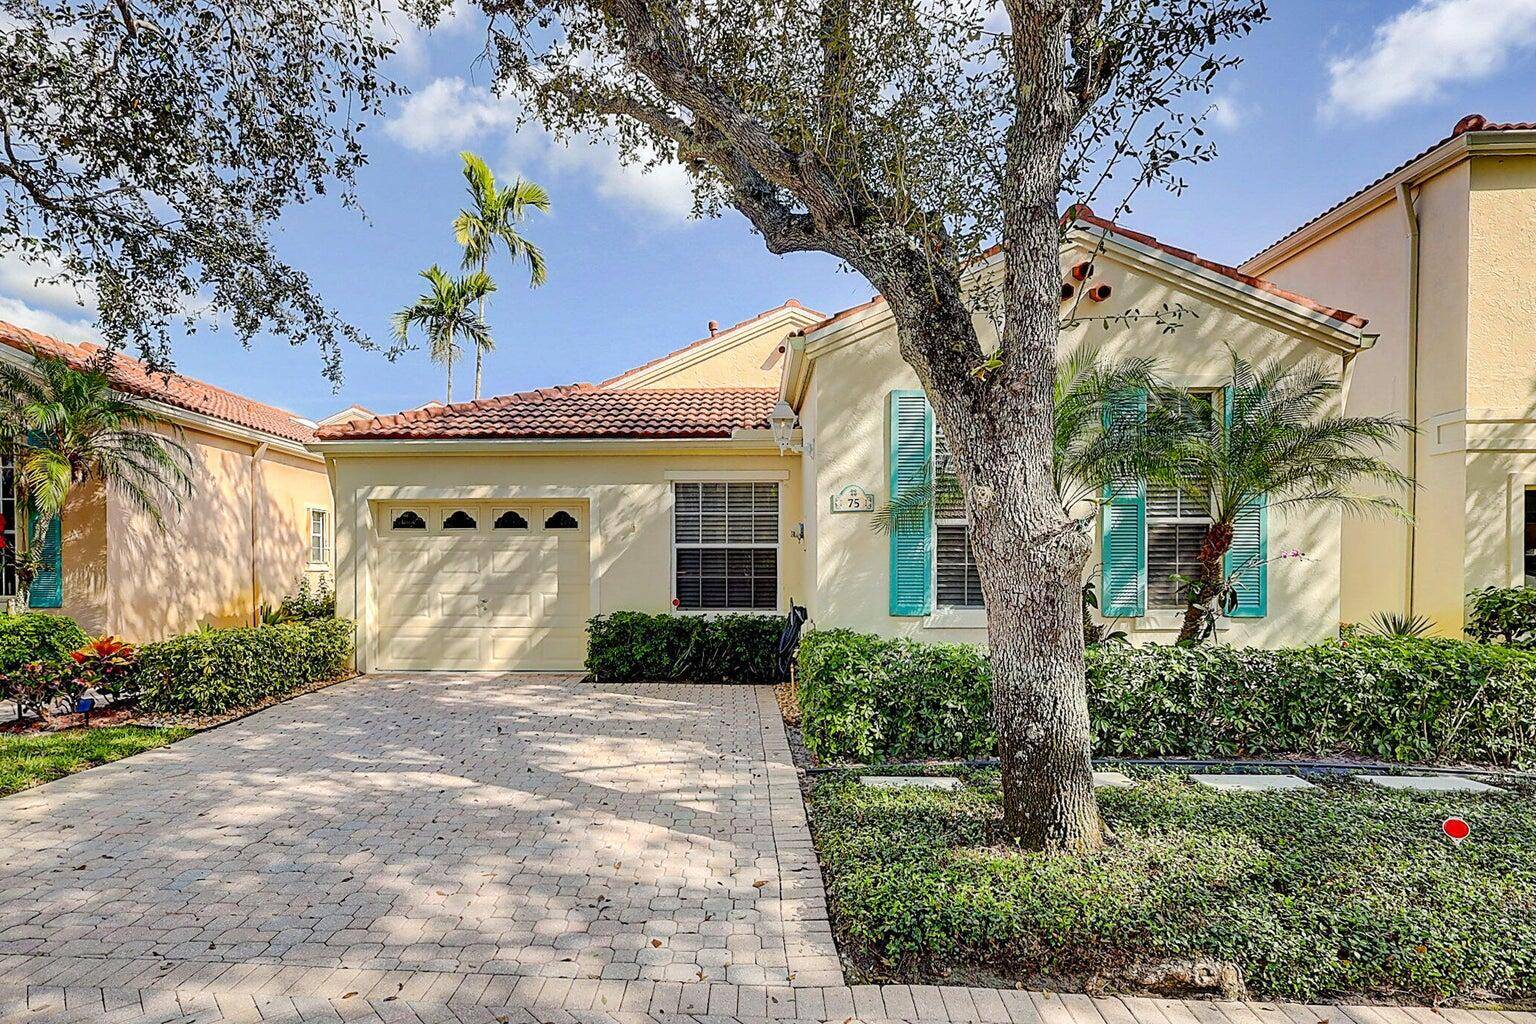 Summer rental. Gorgeous single story home located in the charming community of Villa D'Este in PGA National.